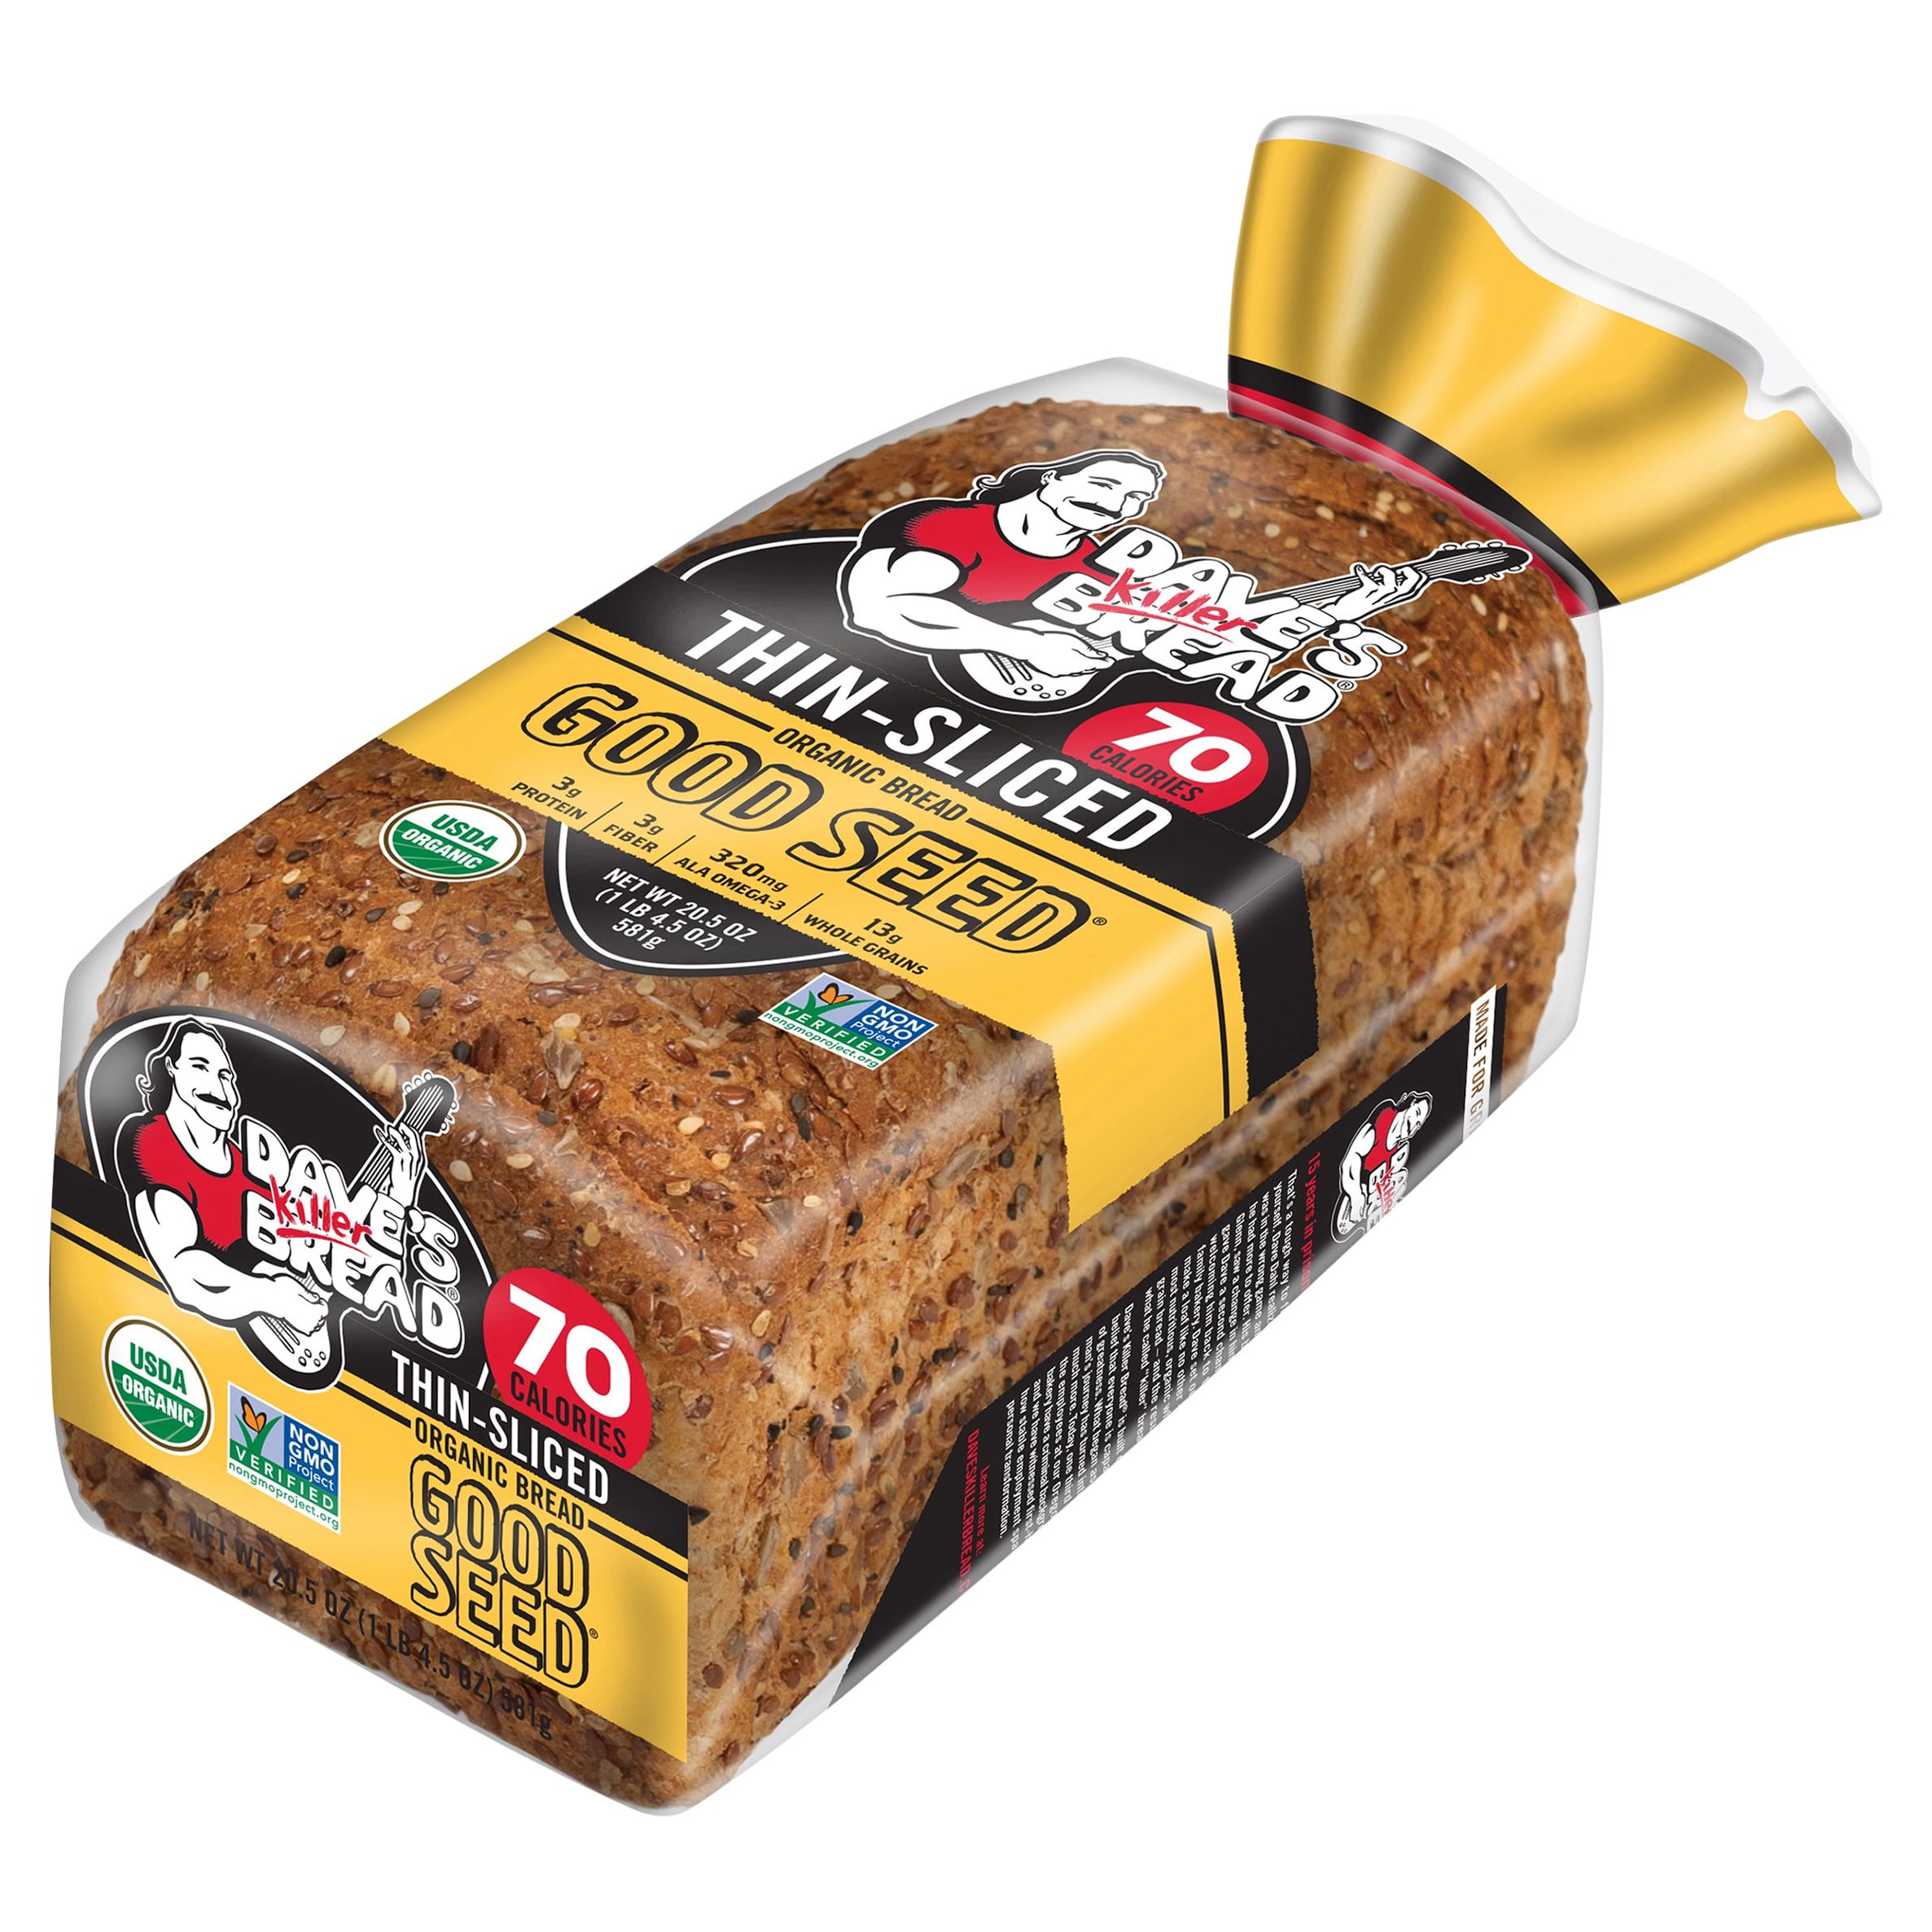 Dave's Killer Bread Good Seed Thin-Sliced Organic Bread Loaf, 20.5 oz - image 11 of 17